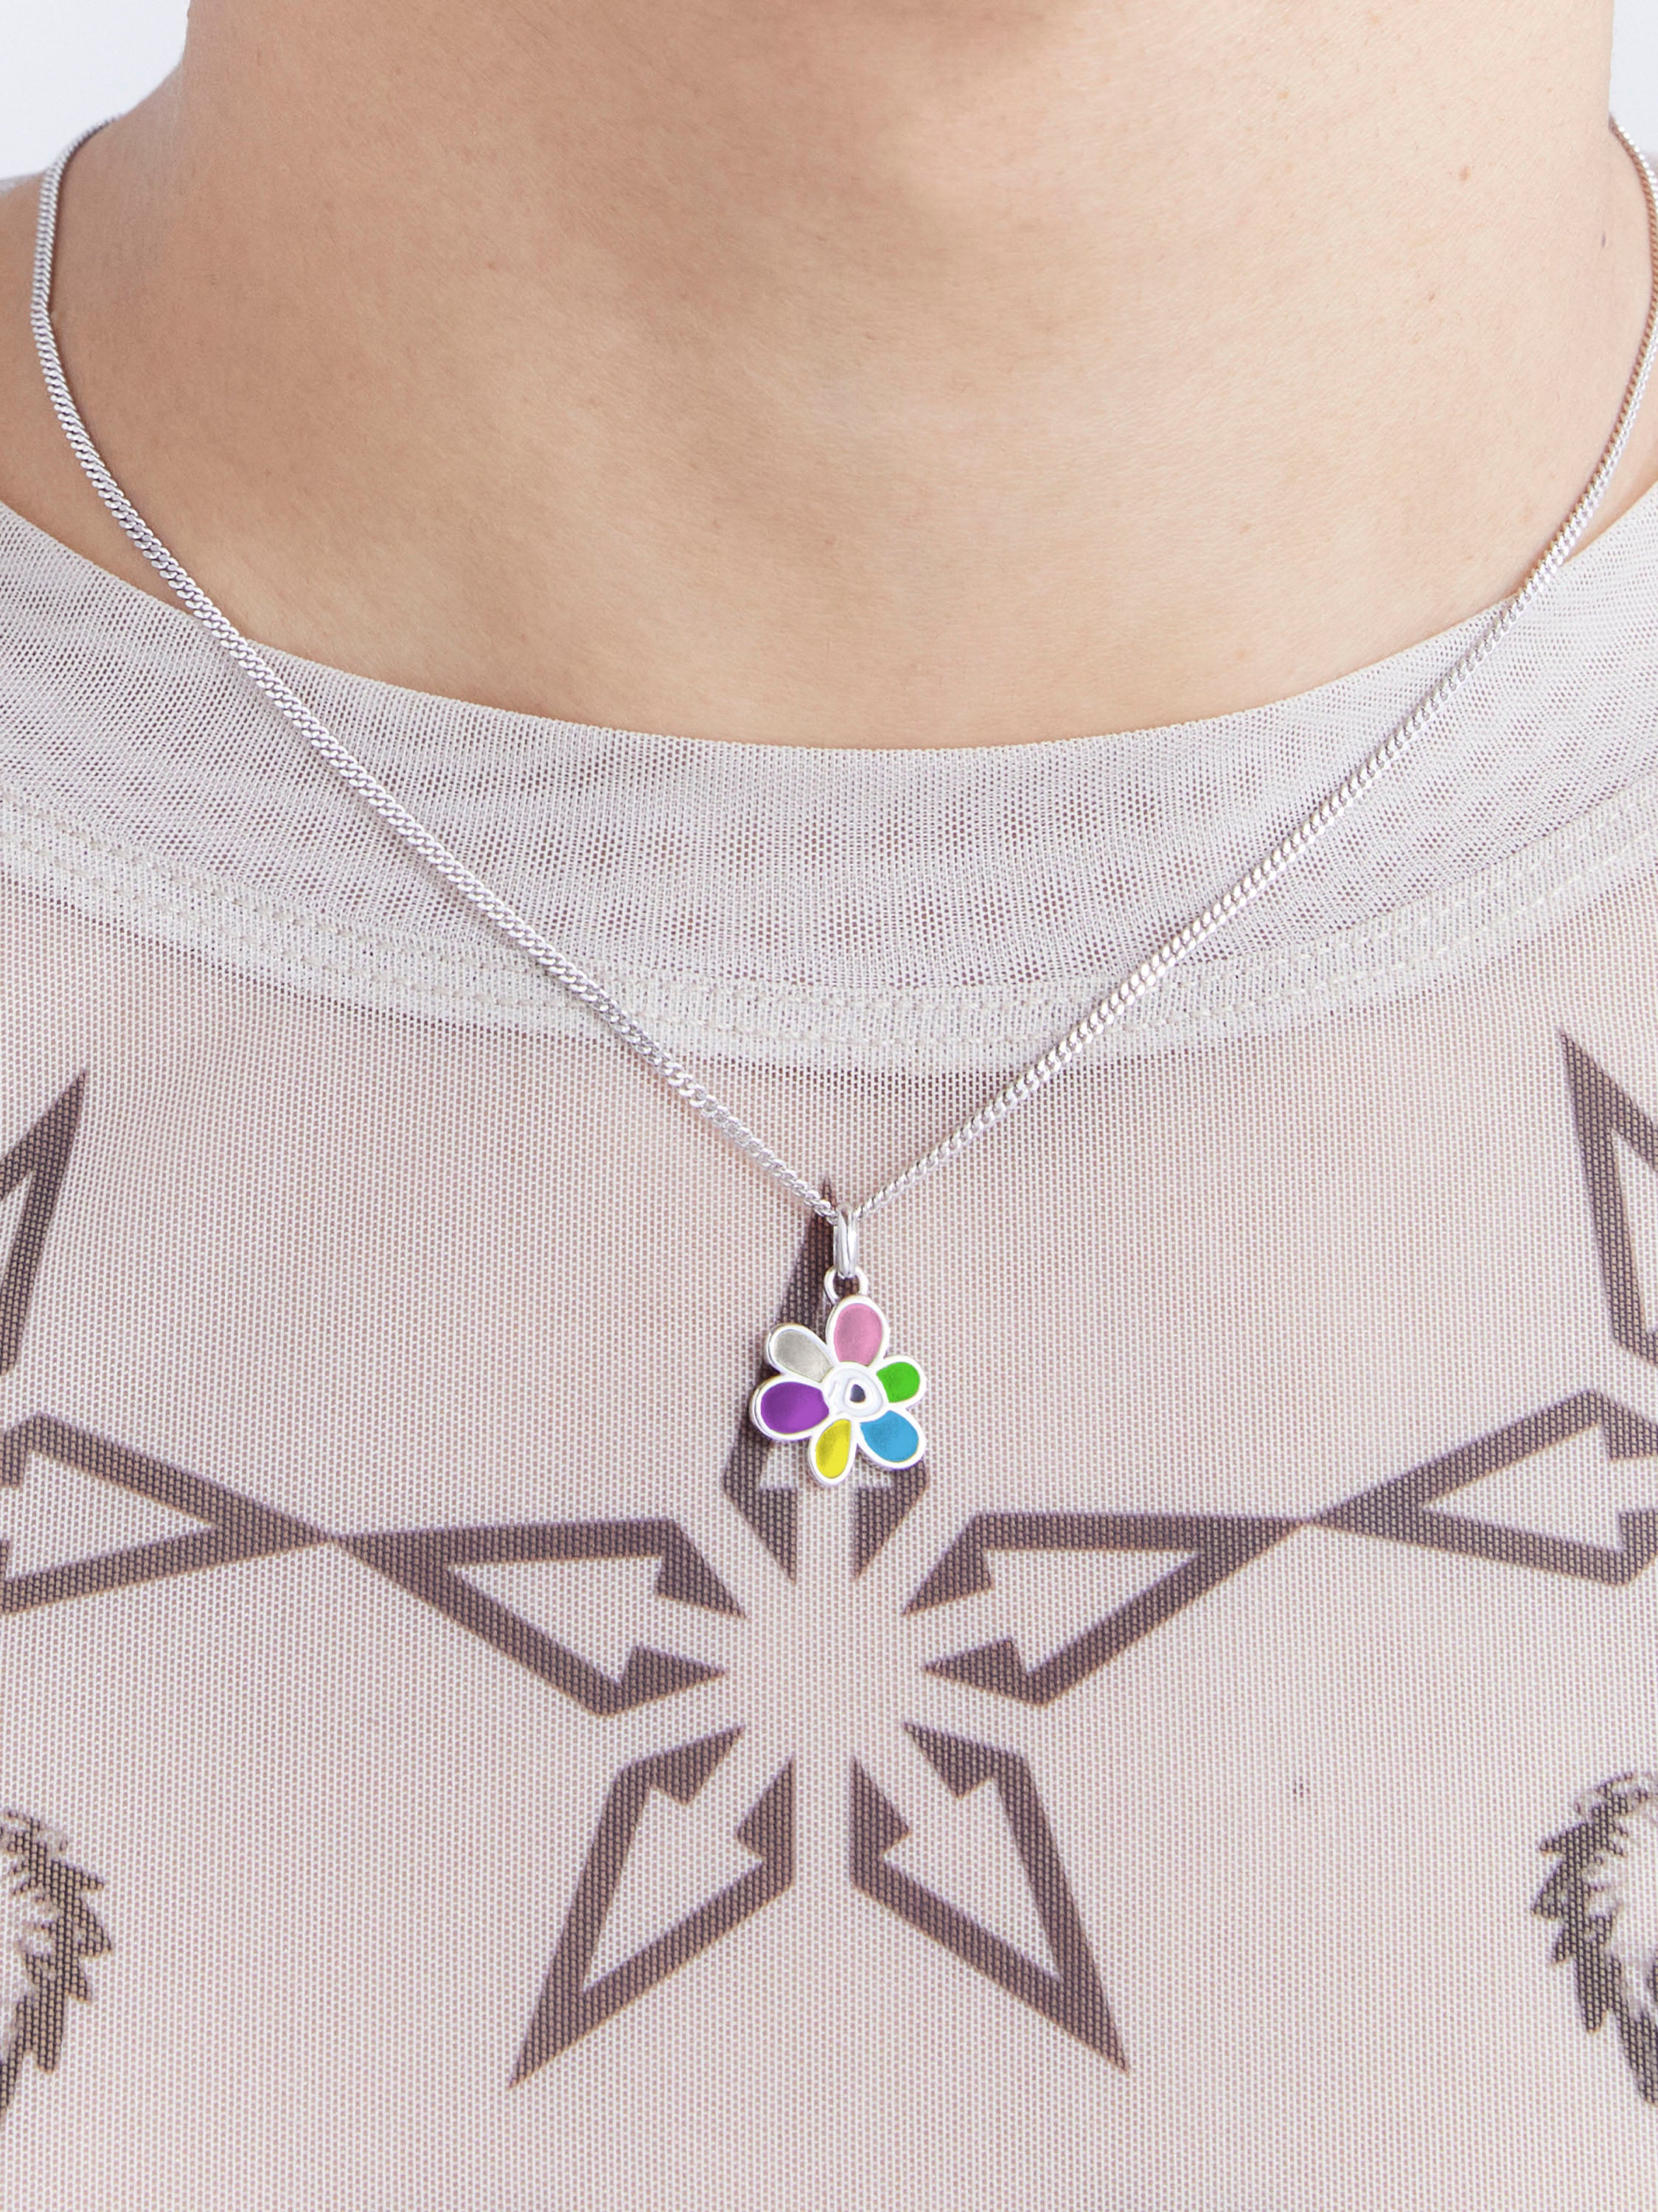 The MULTI COLOUR GESTURES NECKLACE  available online with global shipping, and in PAM Stores Melbourne and Sydney.